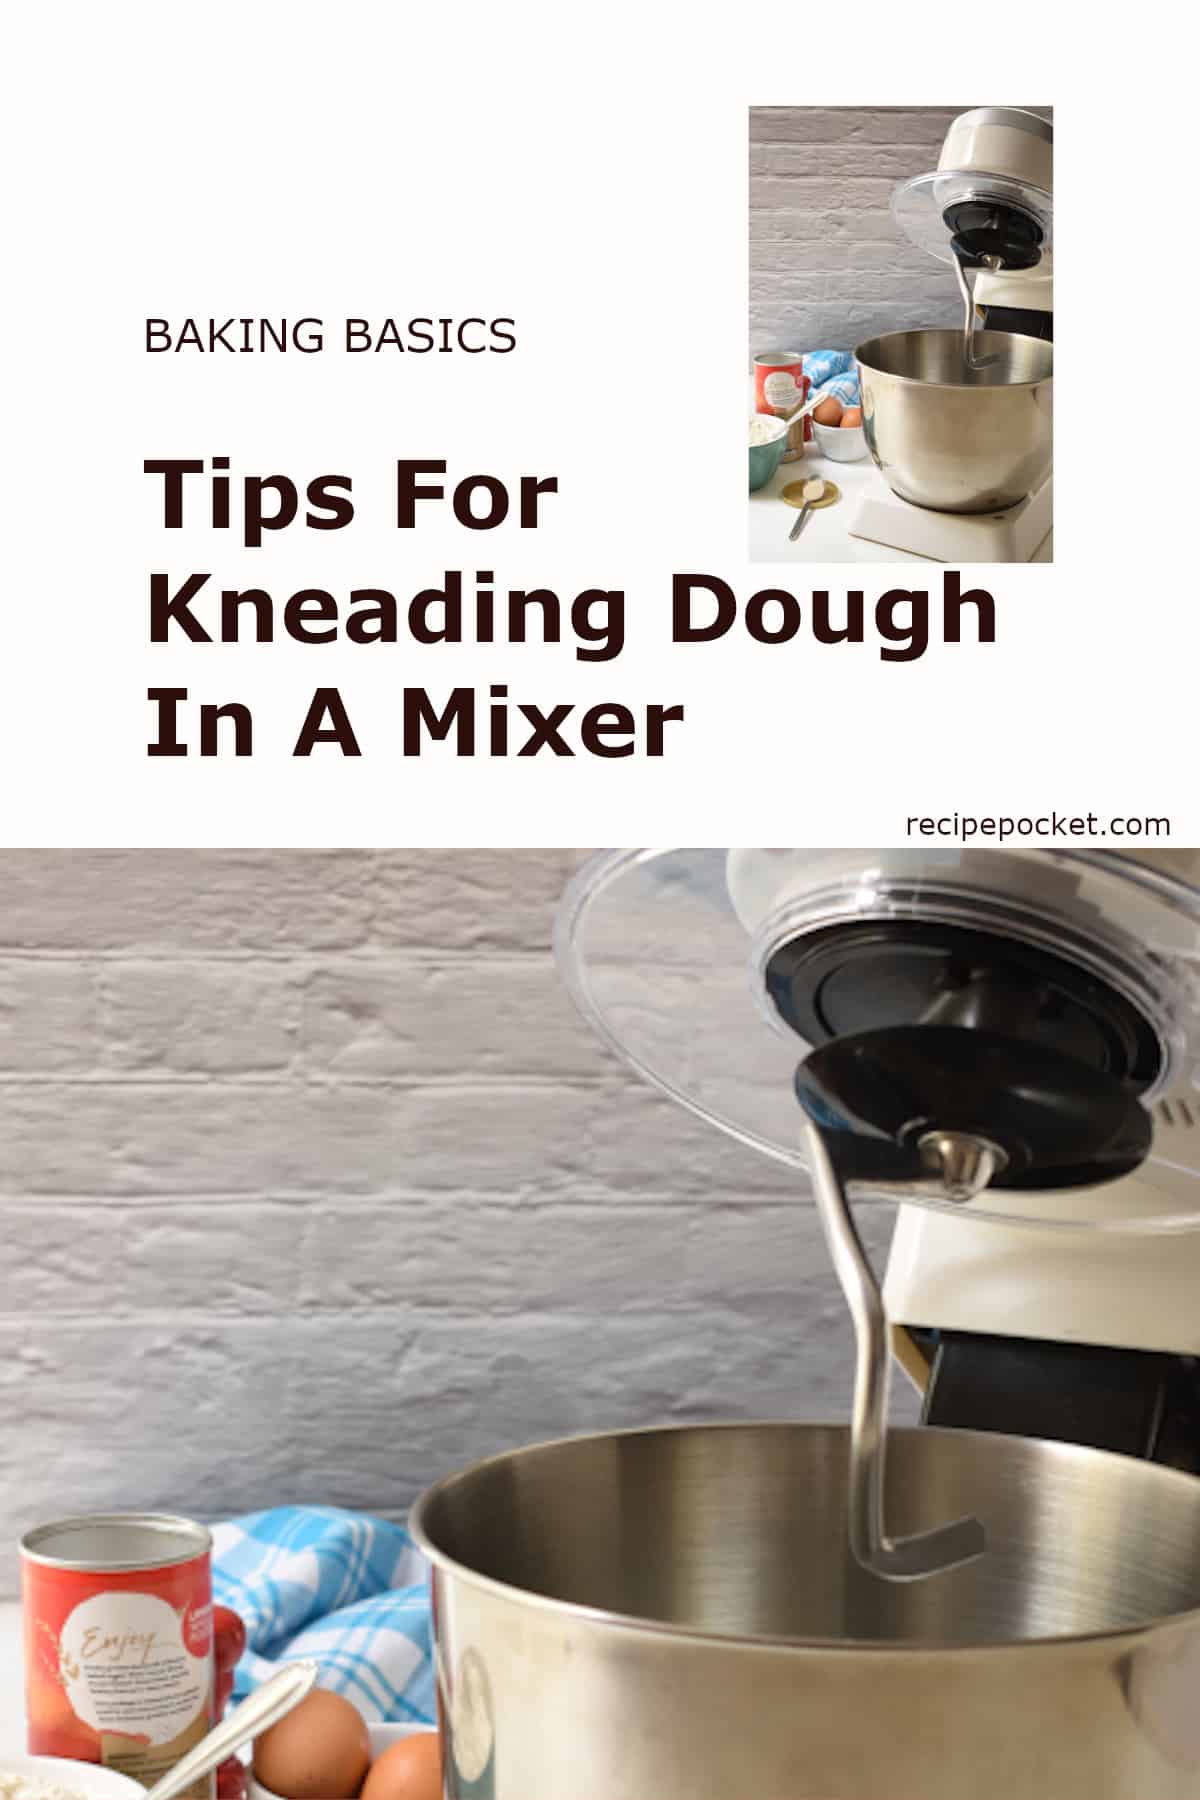 Feature image for blog post kneading dough in mixer.